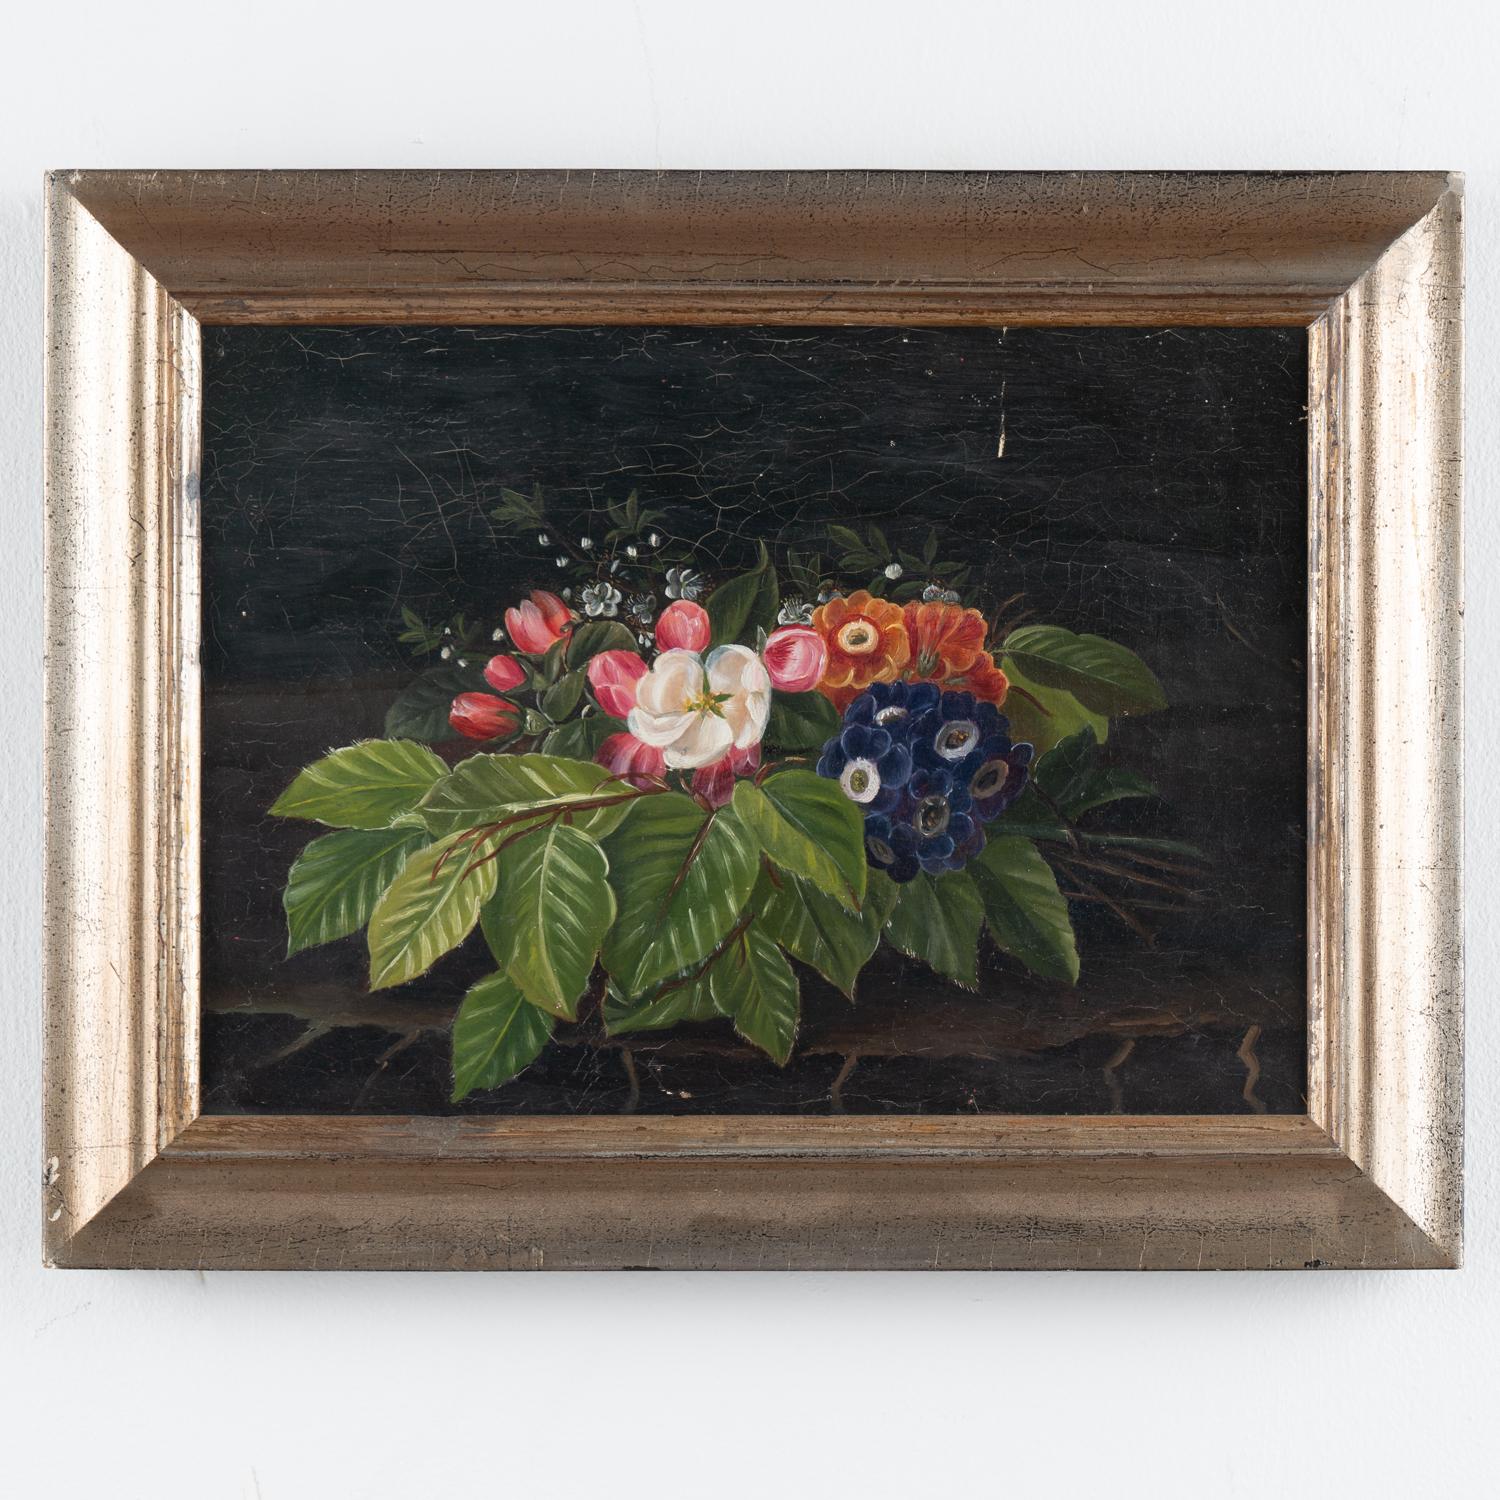 Original oil on canvas still life with auricula, cherry blossom, and beech leaves. Unsigned.
School of I. L. Jensen, 19th Century. 
Sold in original vintage condition, craquelure throughout, minor peelings, etc. Canvas may benefit from light